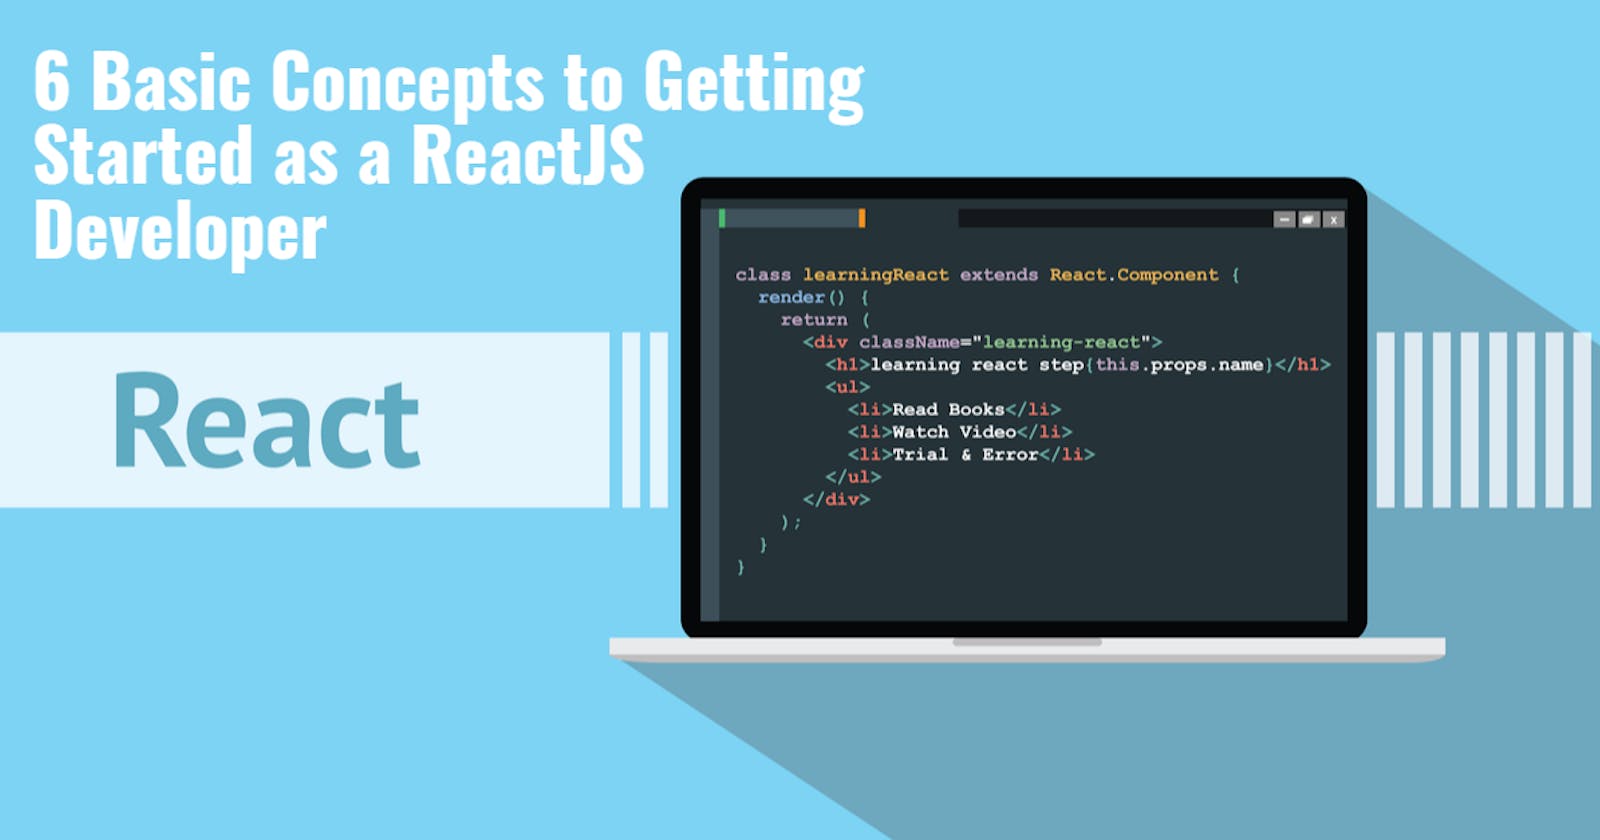 6 Basic Concepts To Getting Started as a ReactJS Developer